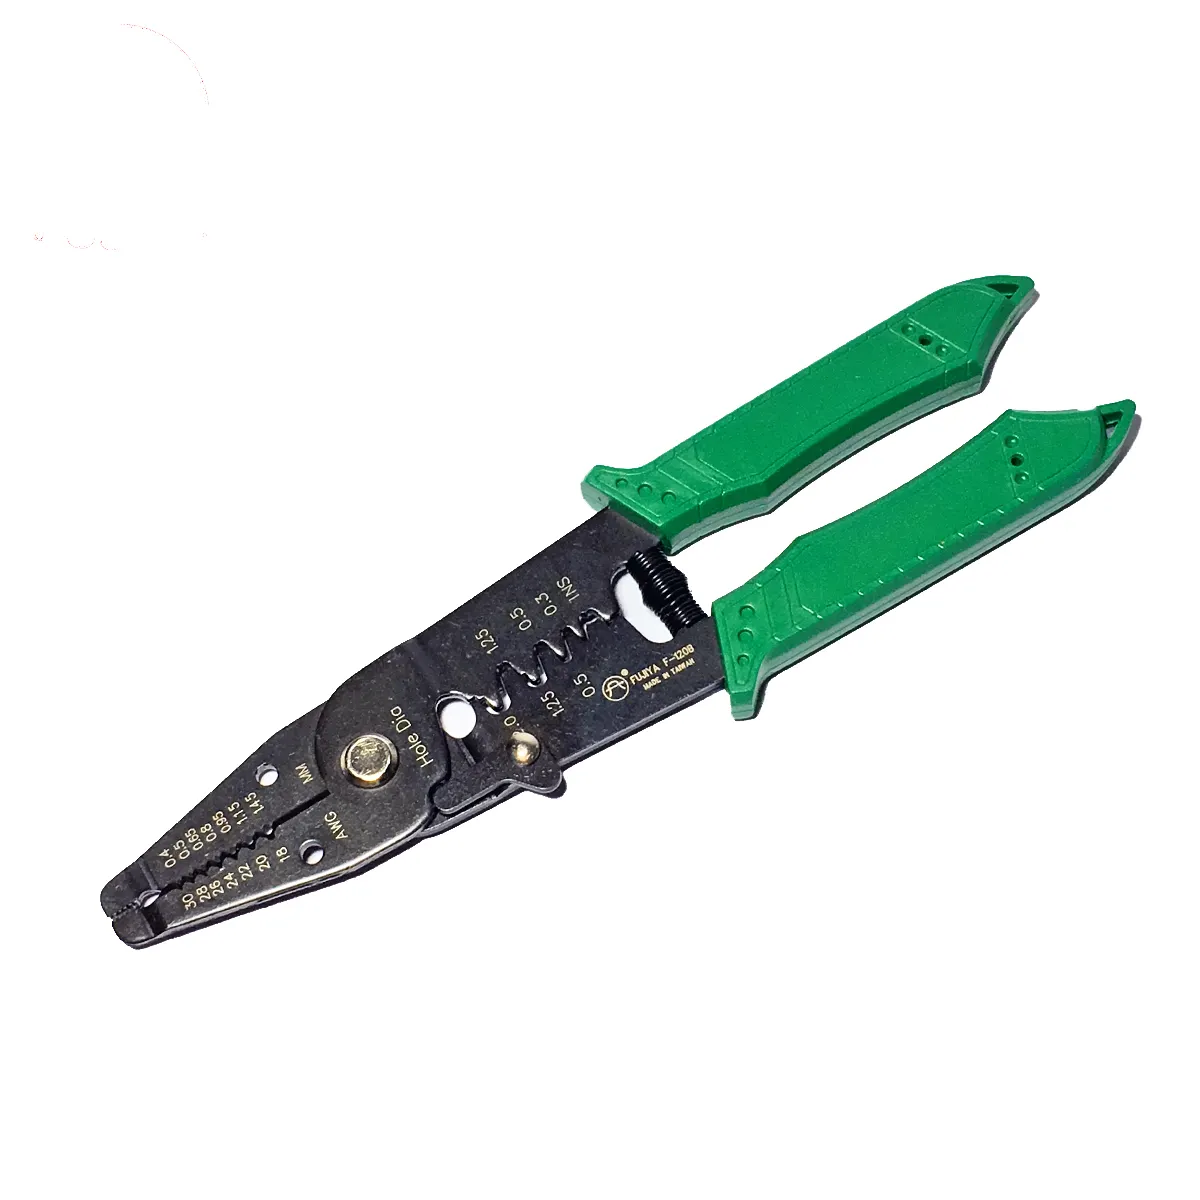 Best Seller 2Cr Stainless Steel Combination Multi Tool Knife Blade Multi Purpose Pliers With Screwdriver Bit Set